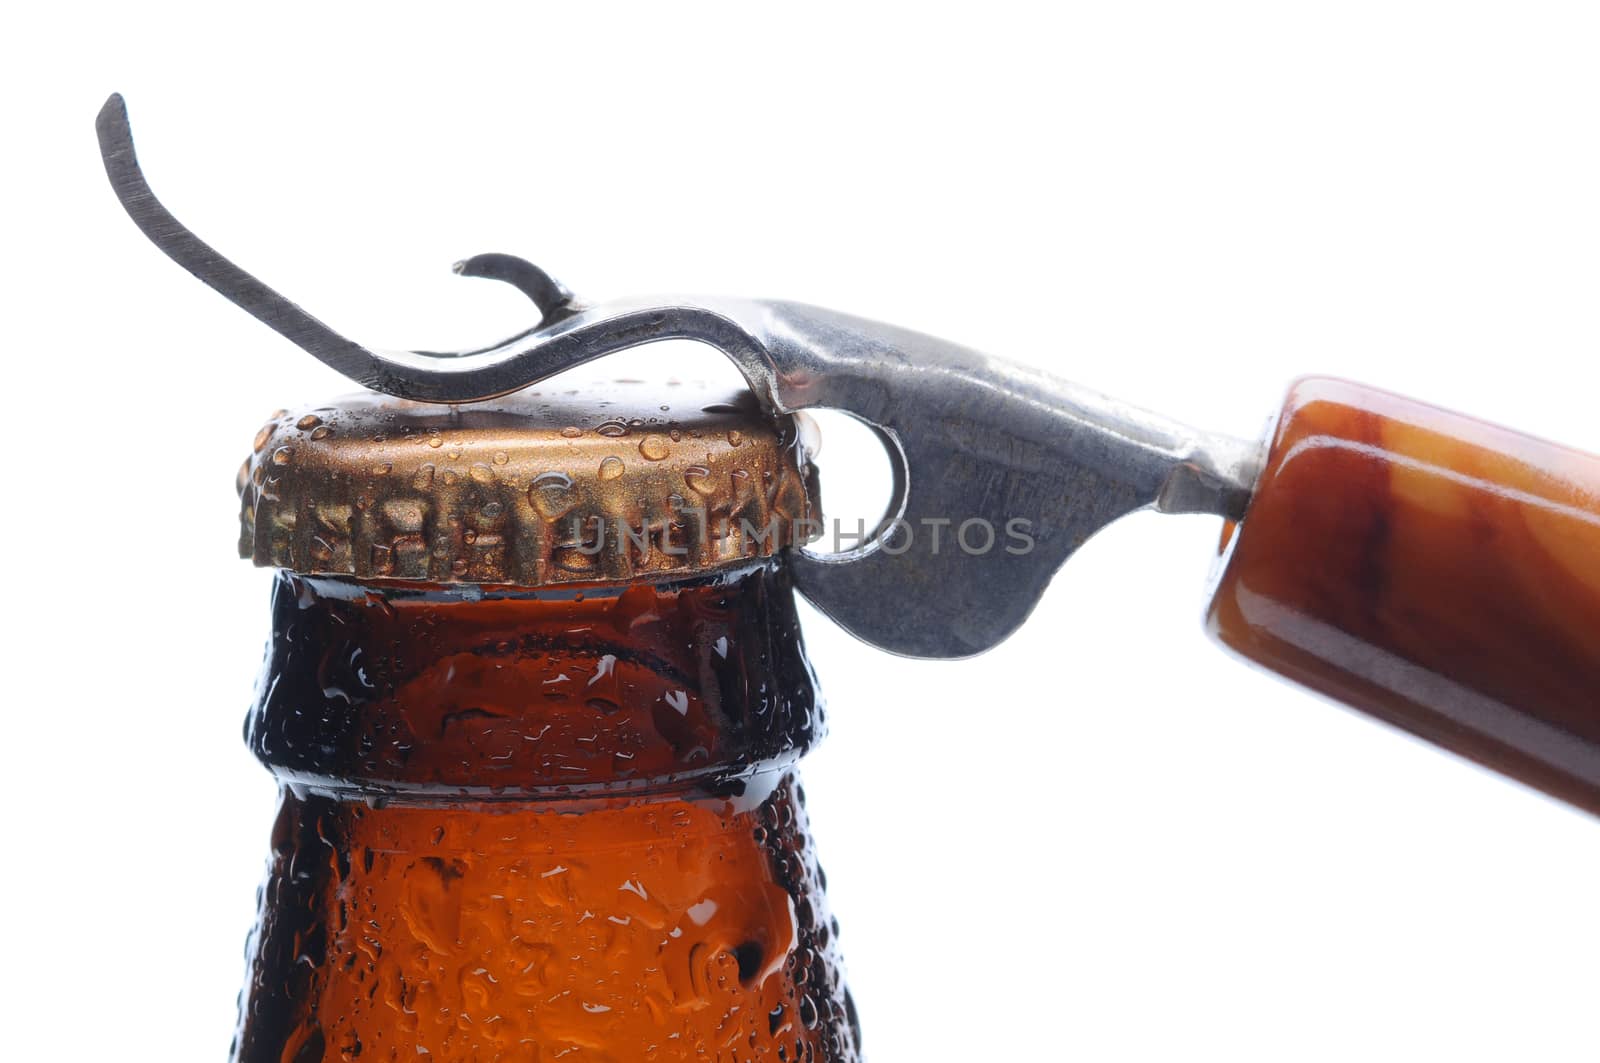 Macro shot of a brown beer bottle with an opener ready to pry up the bottle cap. Horizontal format over white.